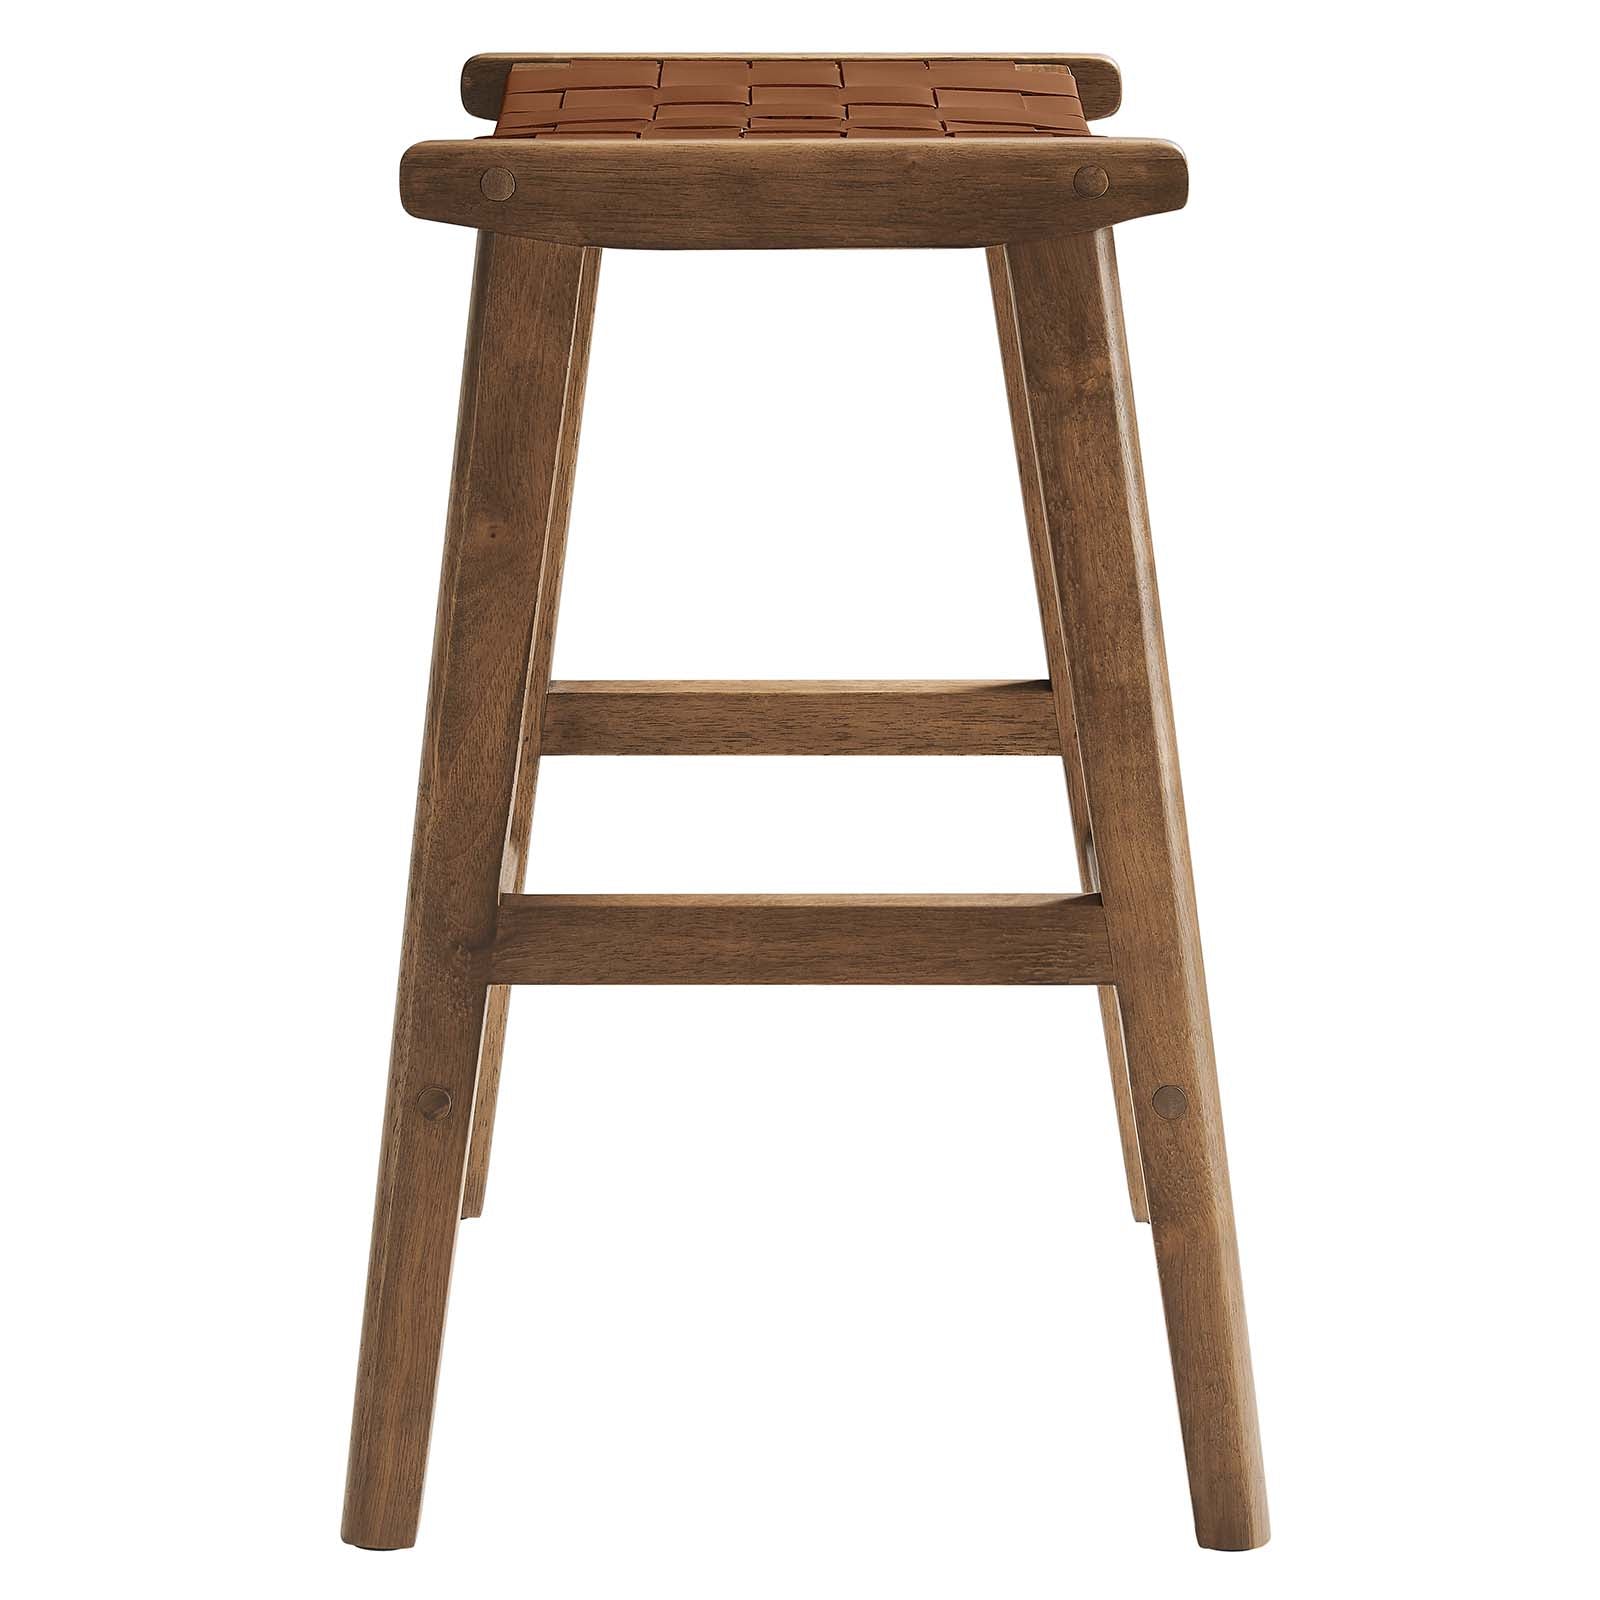 Saorise Woven Leather Wood Counter Stool - Set of 2